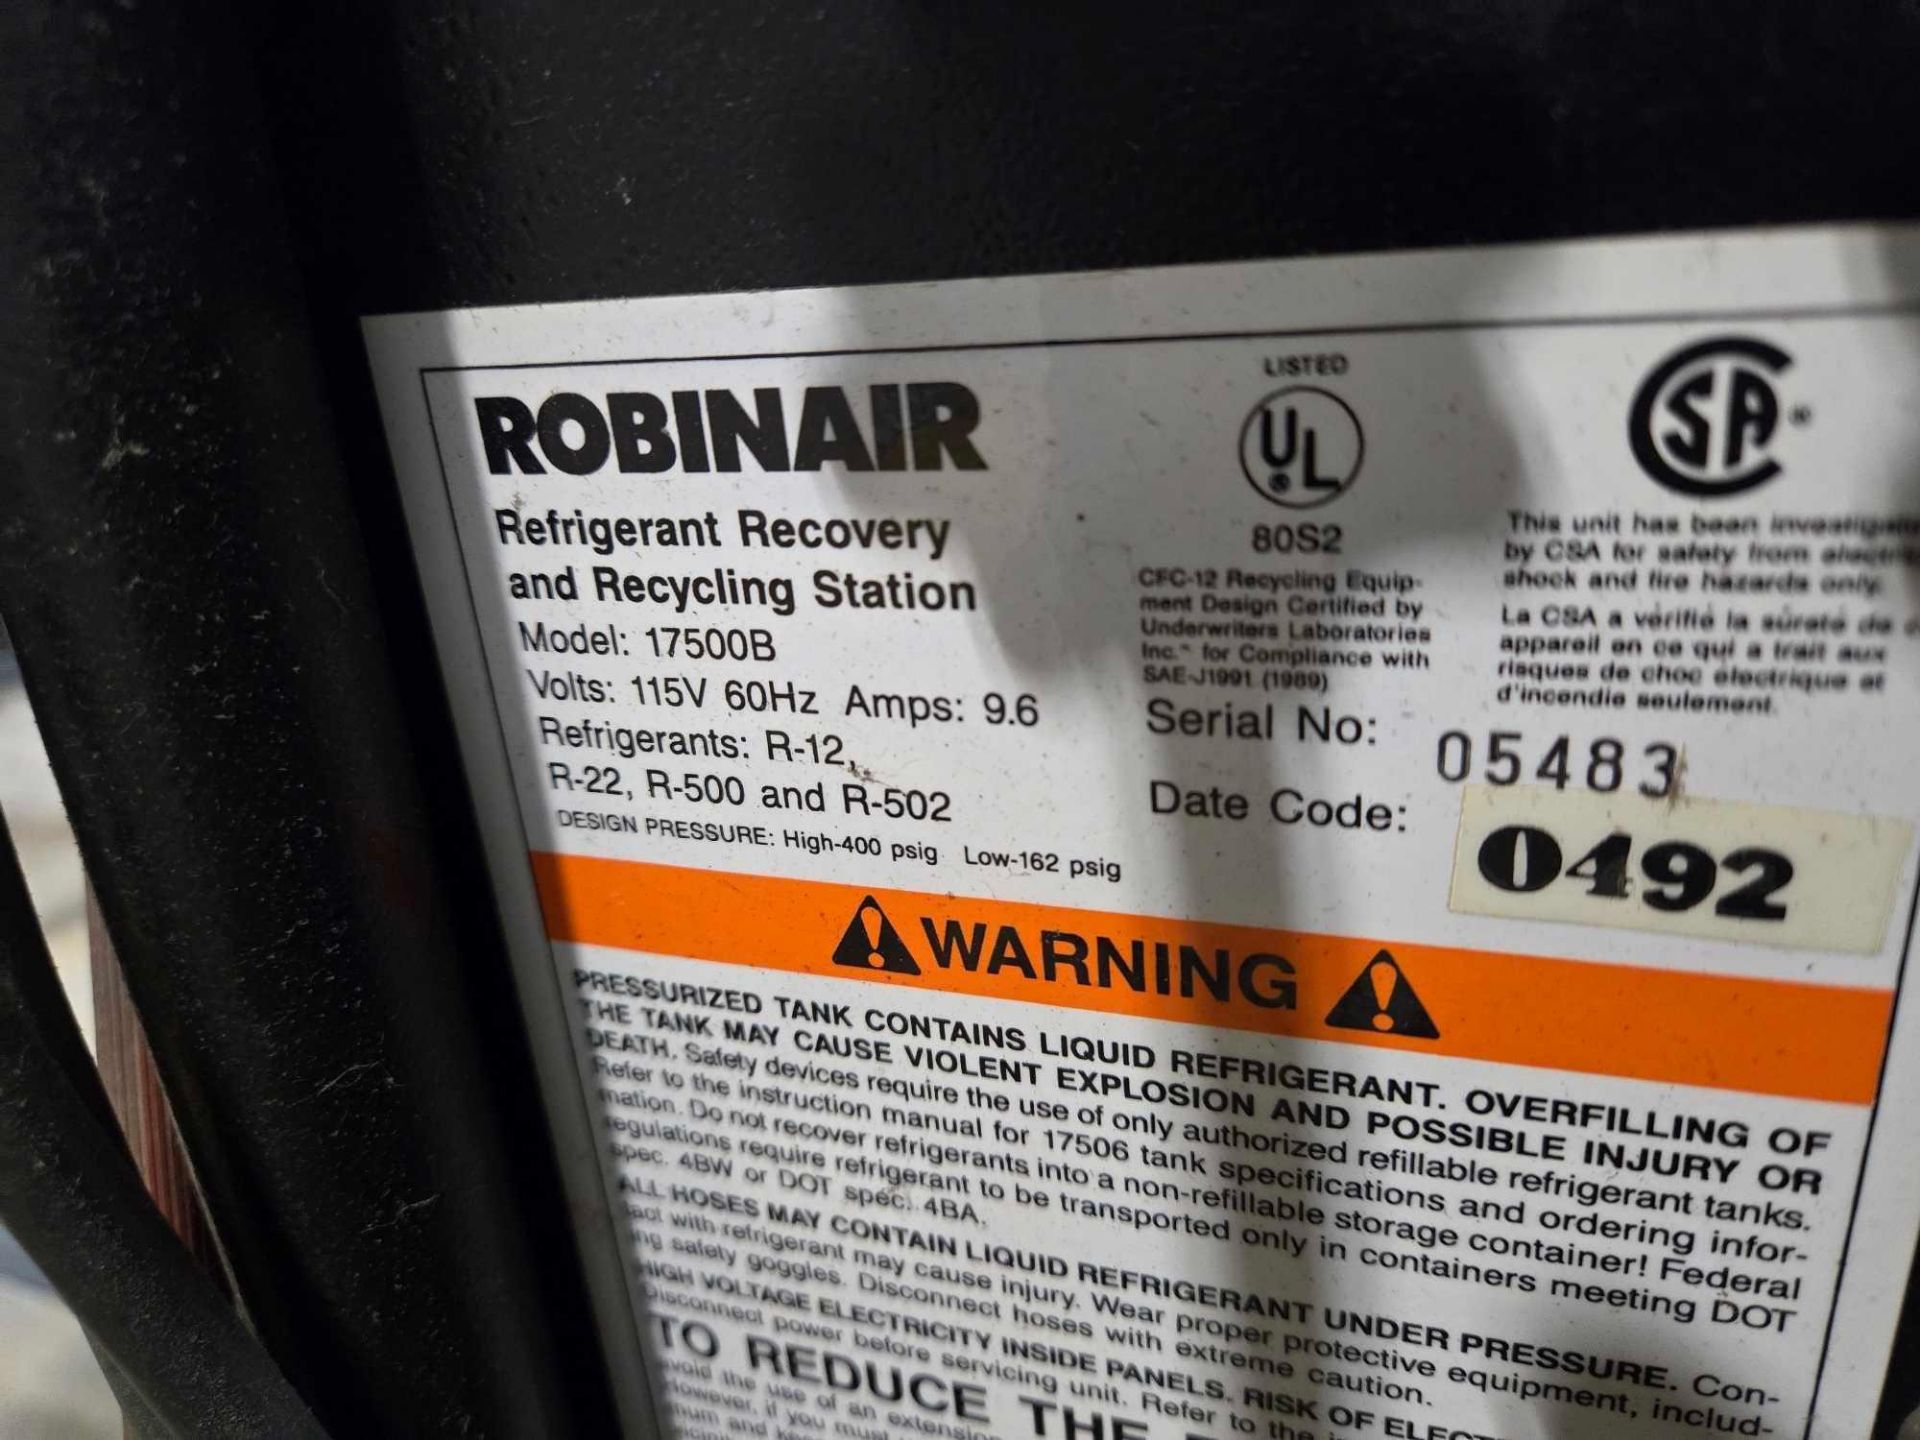 ROBINAIR 17500B REFRIGERANT RECOVERY AND RECYCLING STATION - Image 13 of 13